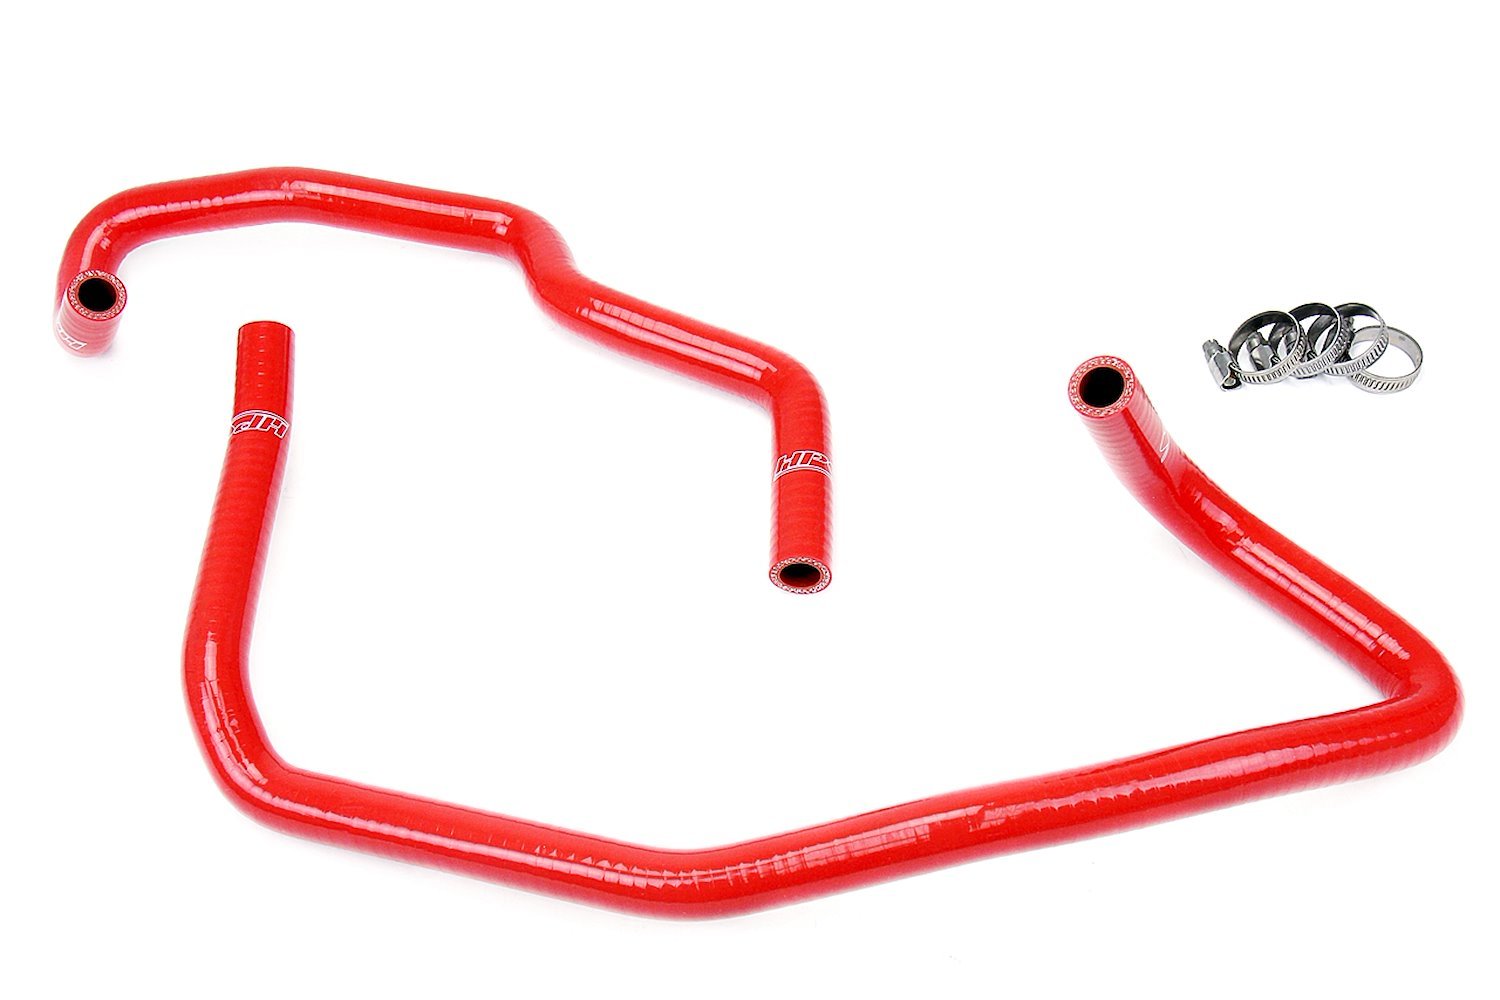 57-1468-RED Heater Hose Kit, High-Temp 3-Ply Reinforced Silicone, Replace OEM Rubber Heater Coolant Hoses